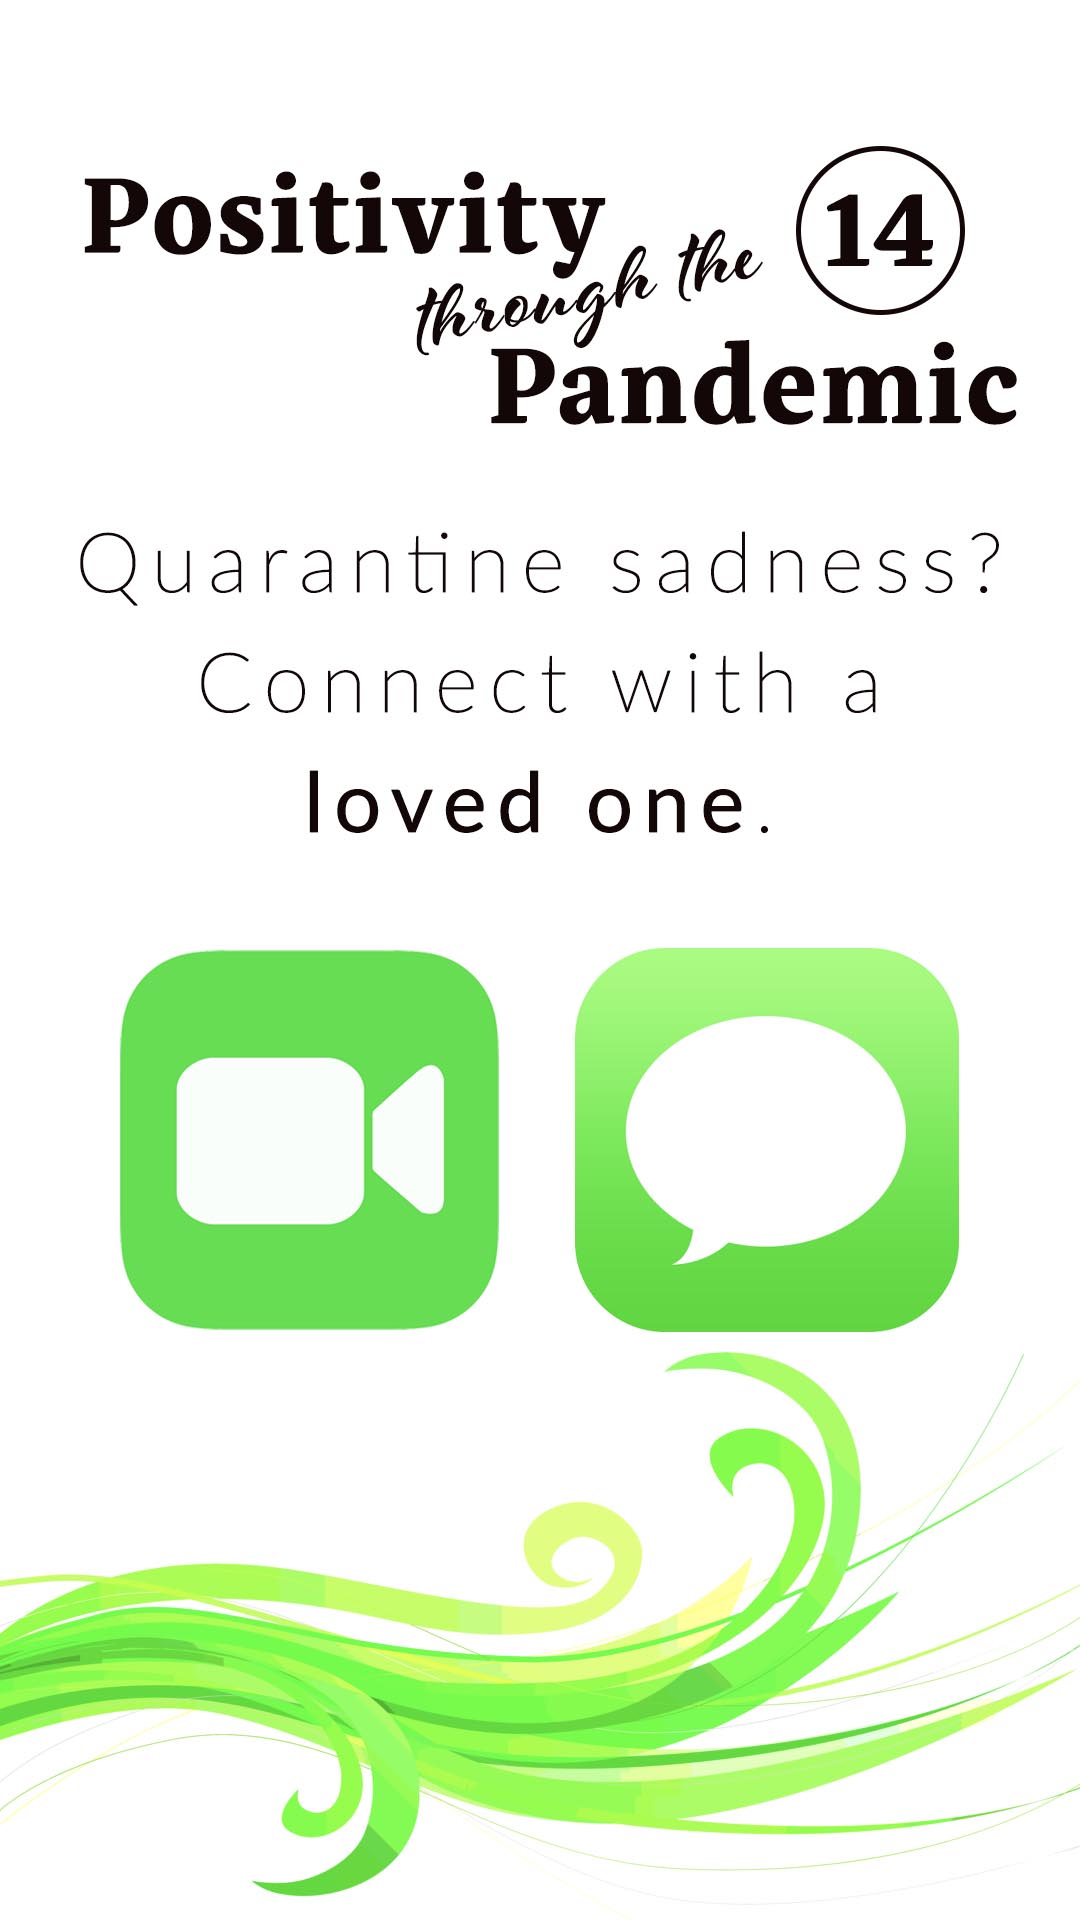 Positivity through the Pandemic #14: Quarantine sadness connect with a loved one